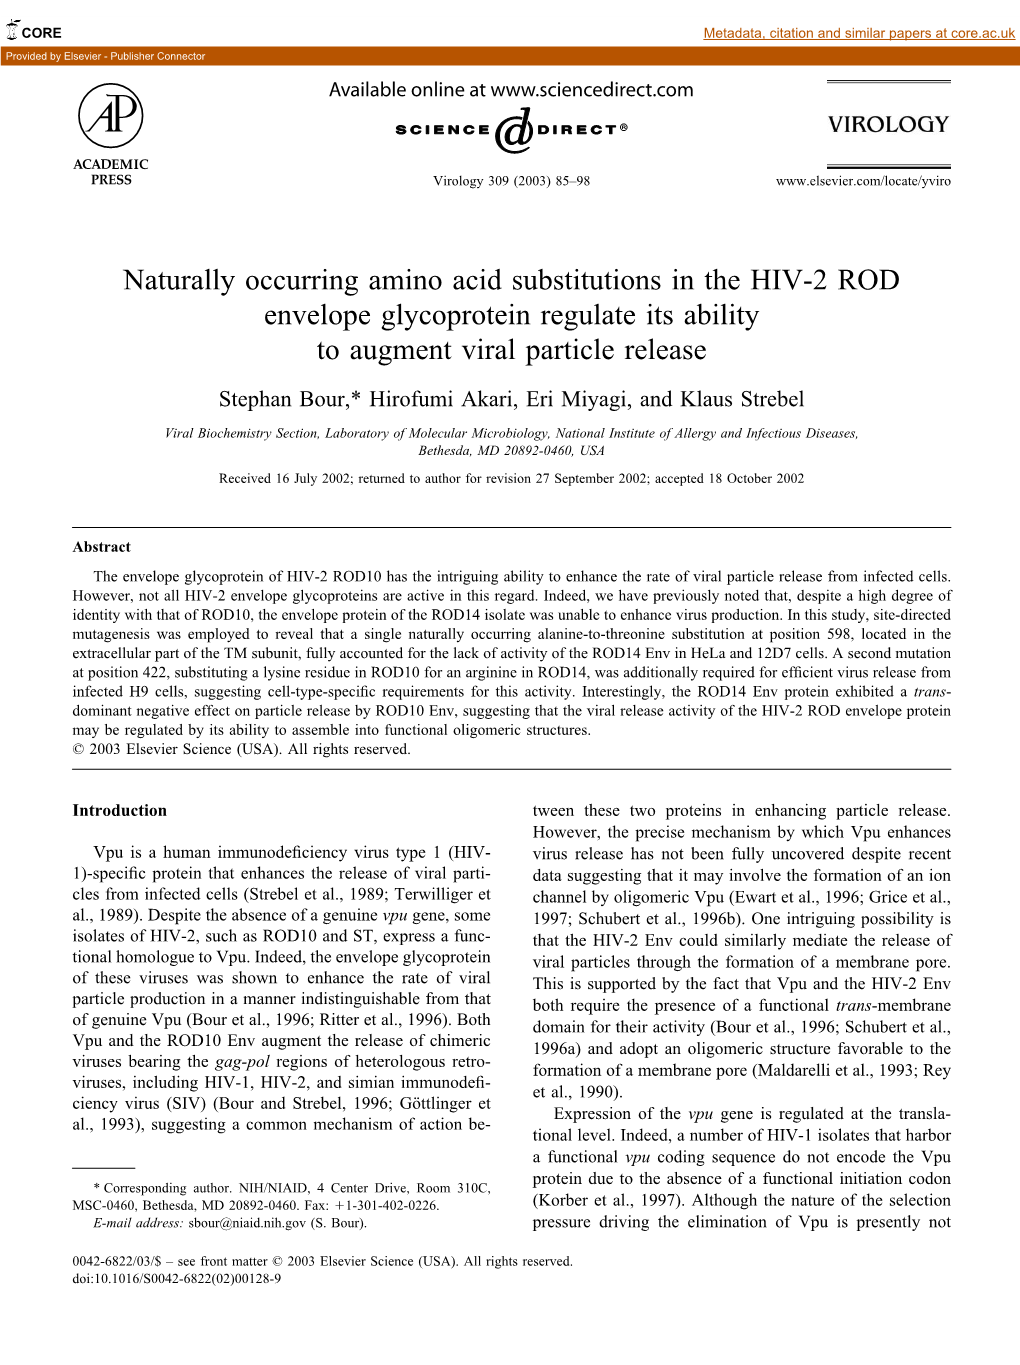 Naturally Occurring Amino Acid Substitutions in the HIV-2 ROD Envelope Glycoprotein Regulate Its Ability to Augment Viral Particle Release